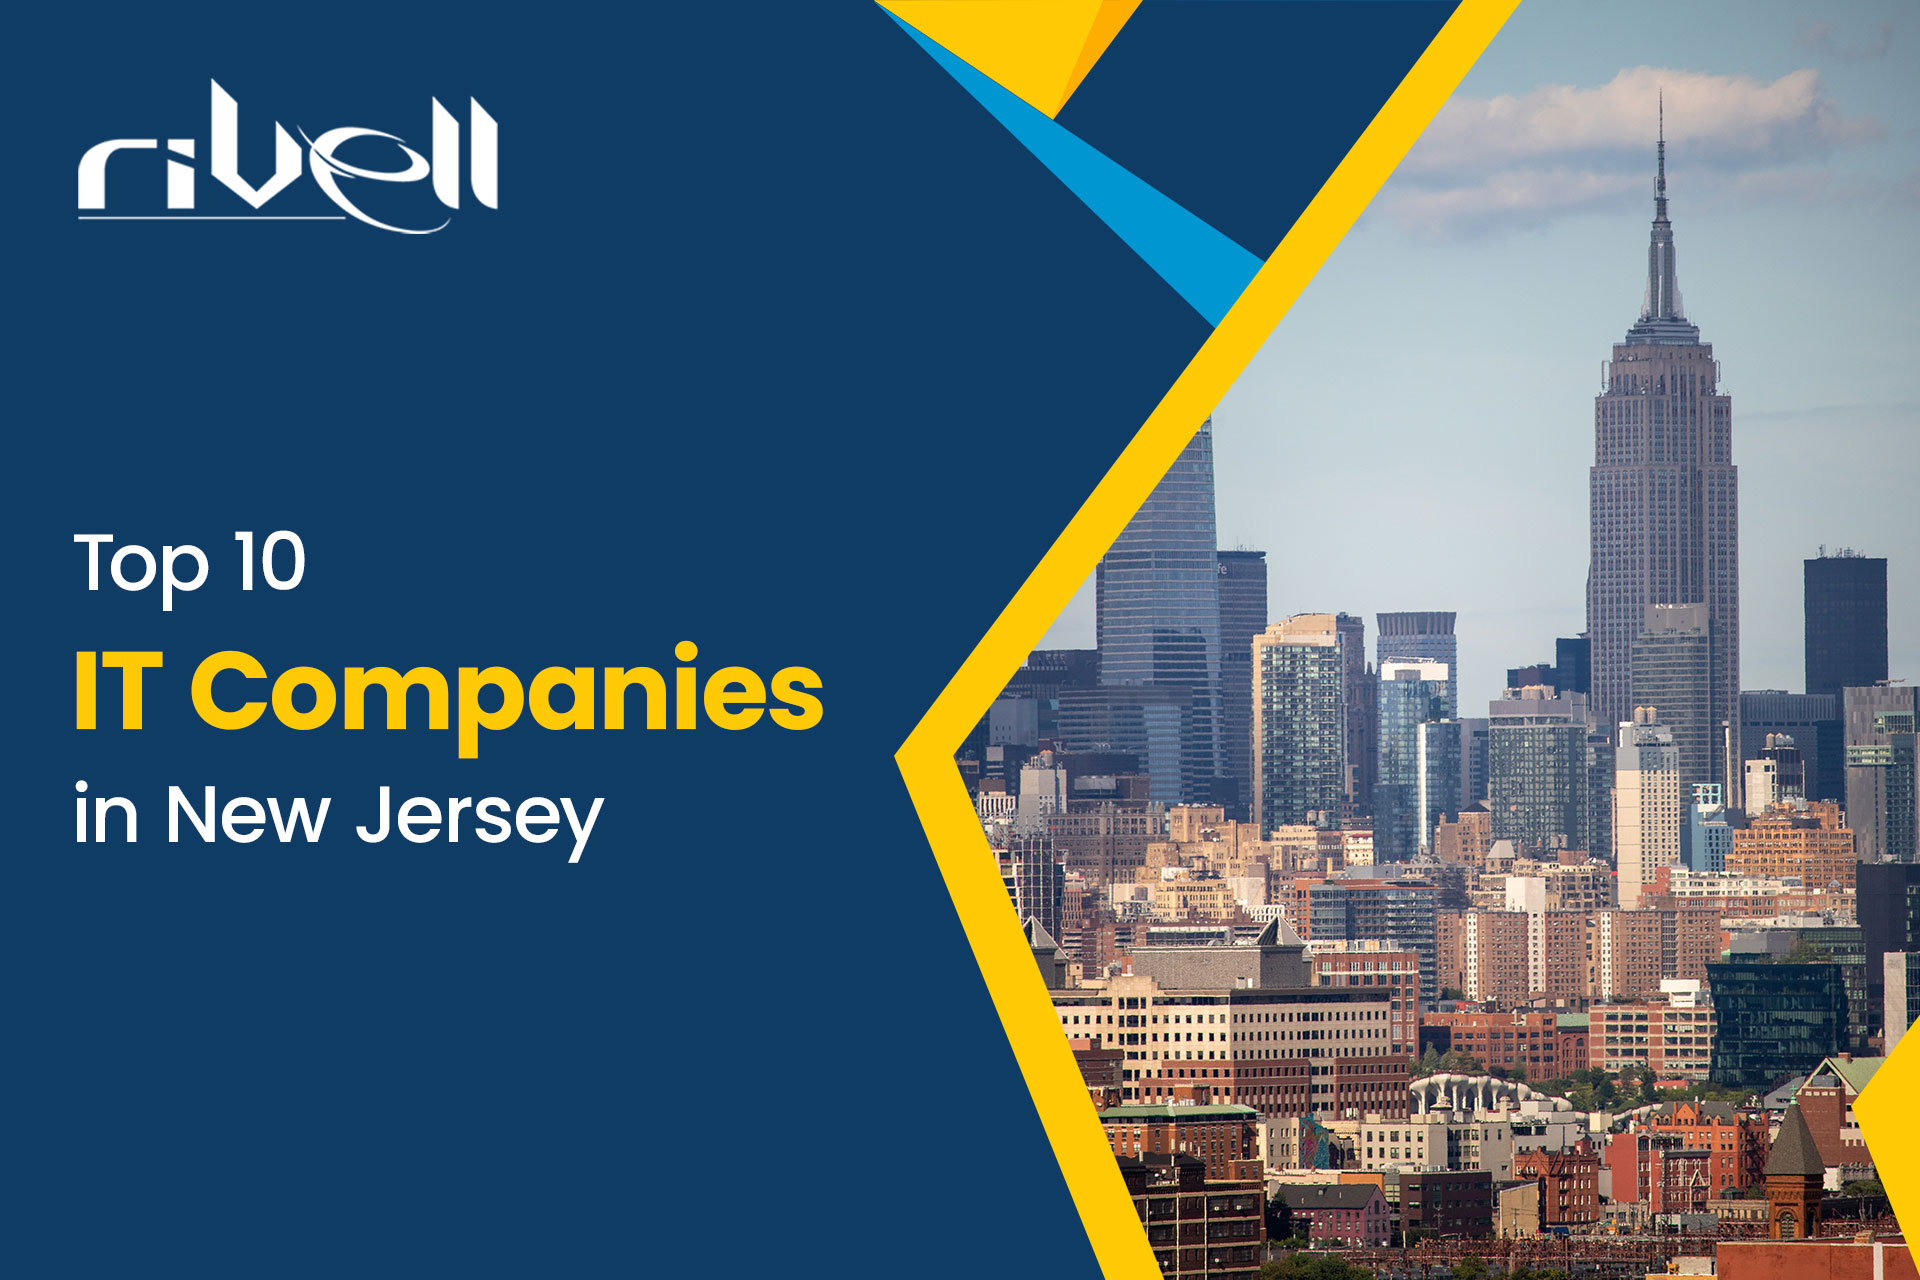 Top 10 IT Companies in New Jersey